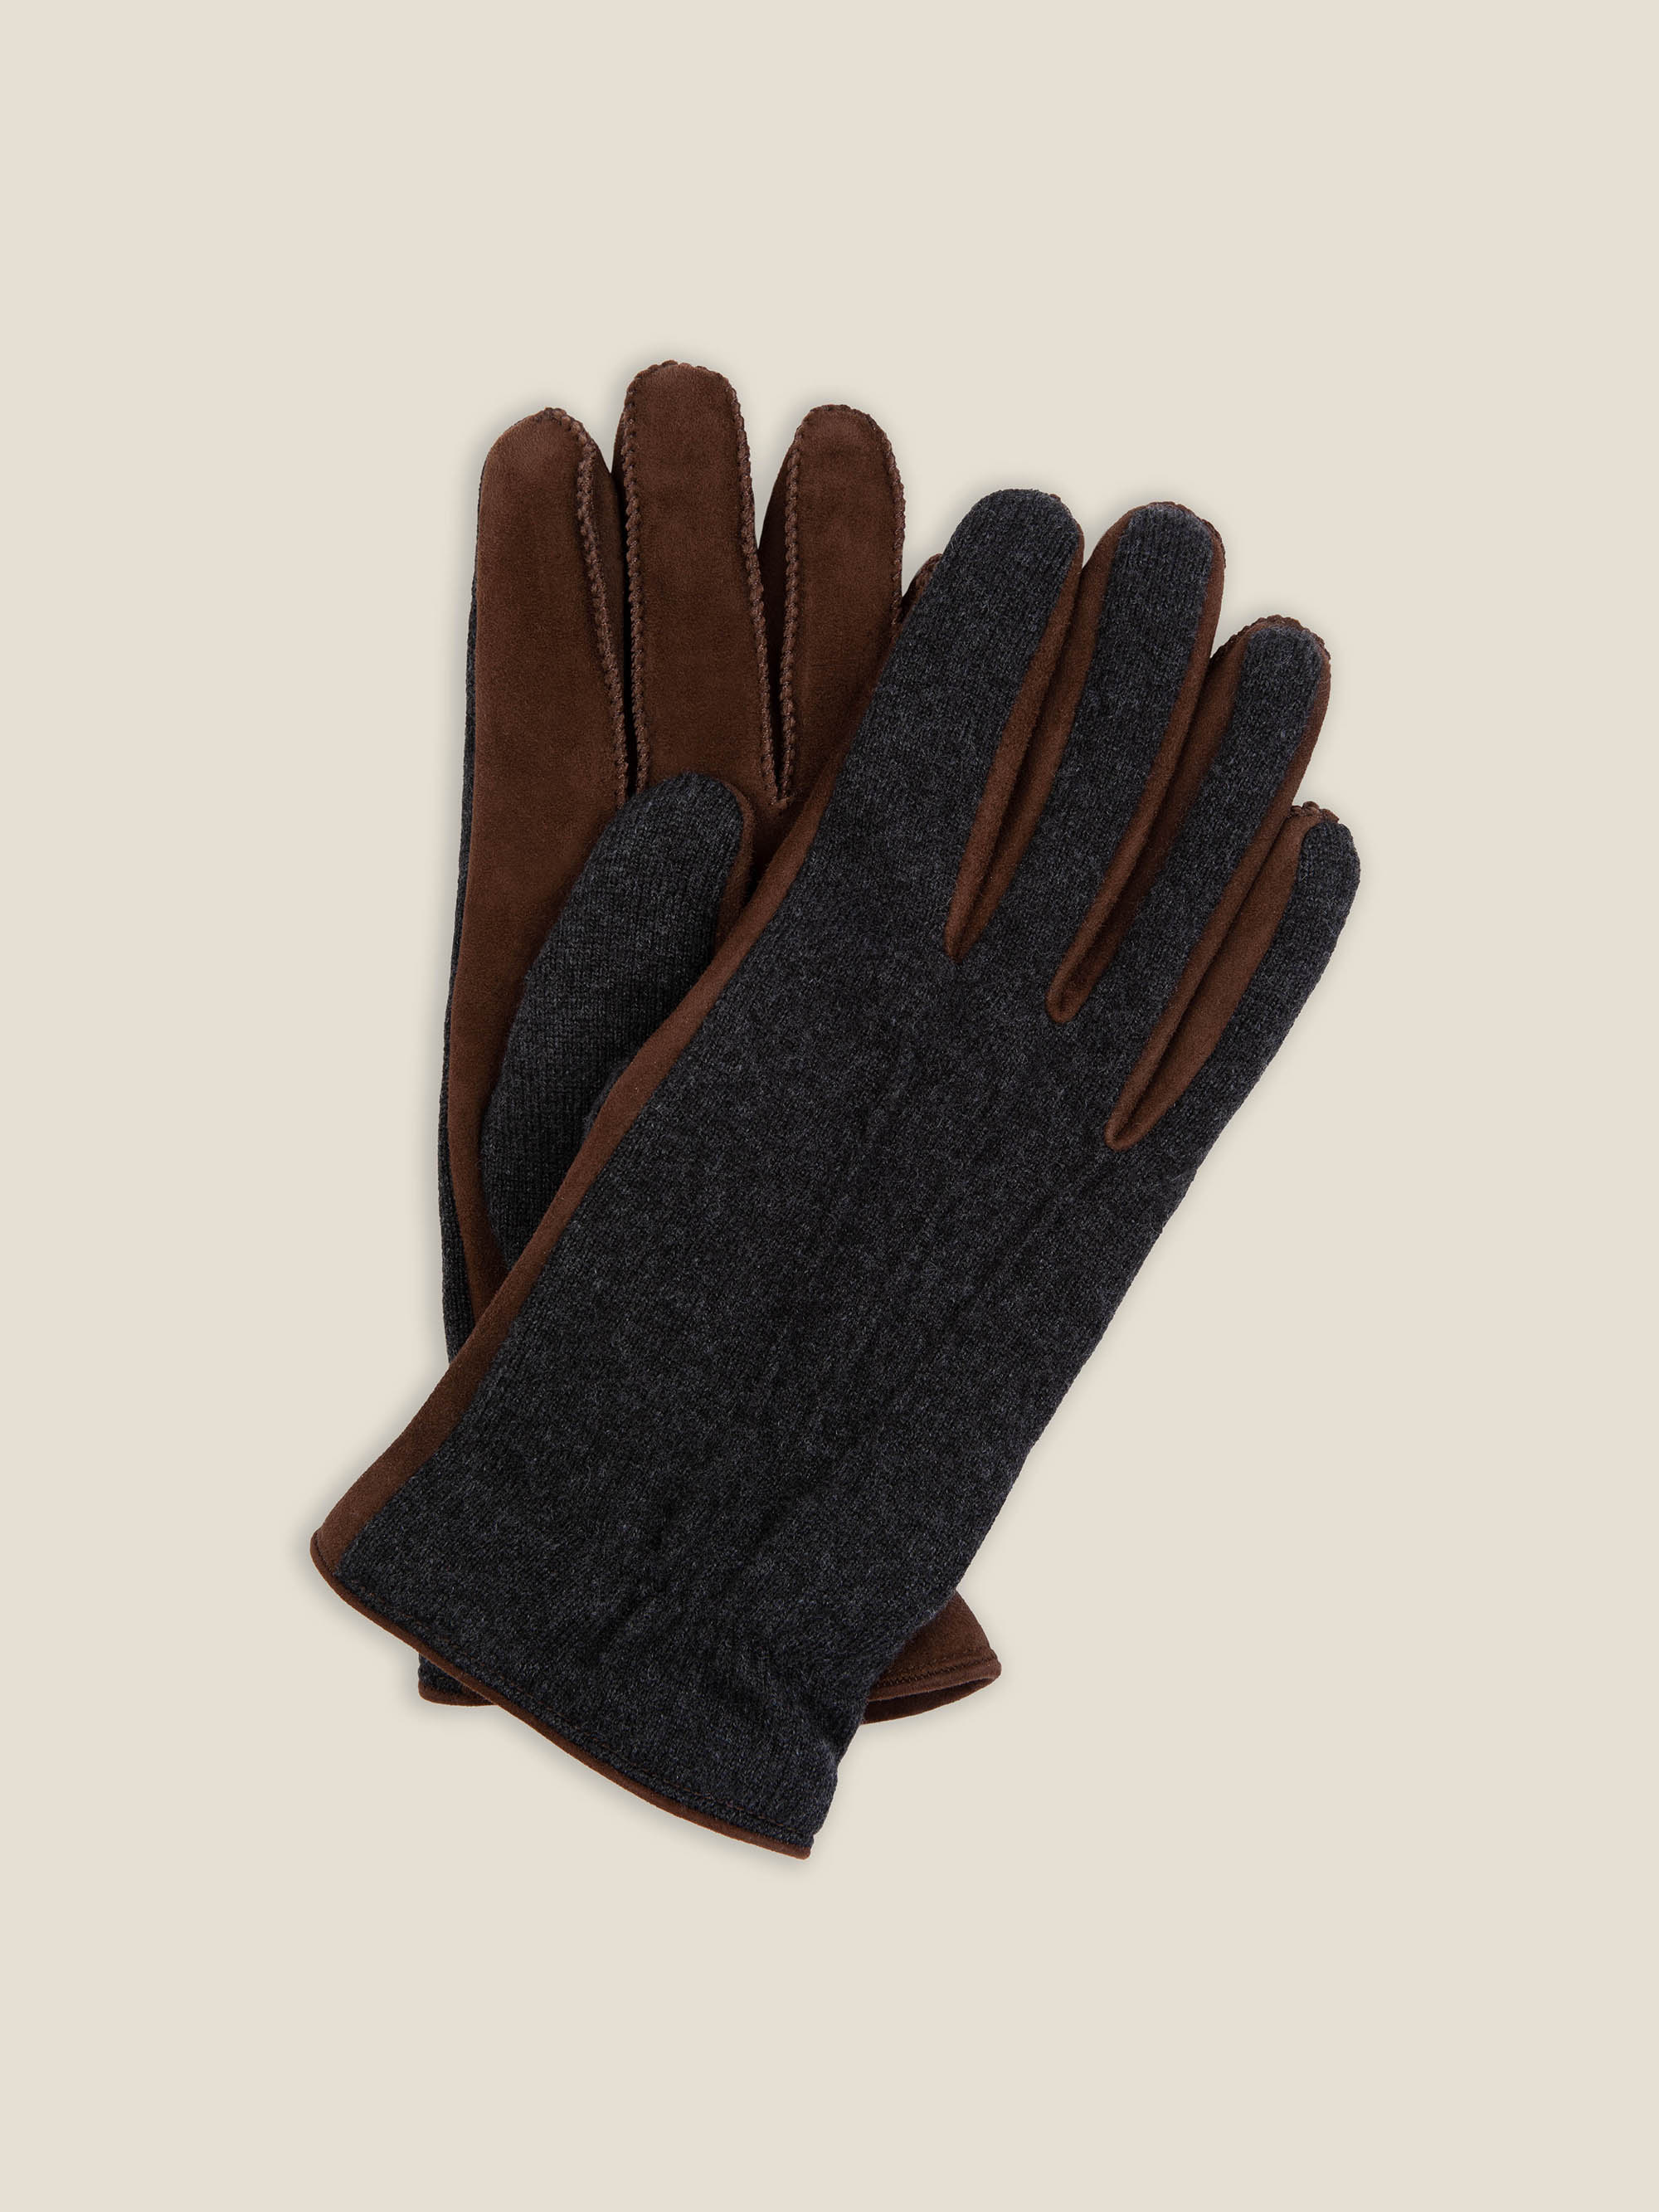 luca faloni us - Brown and Charcoal Grey Cashmere and Suede Gloves ...